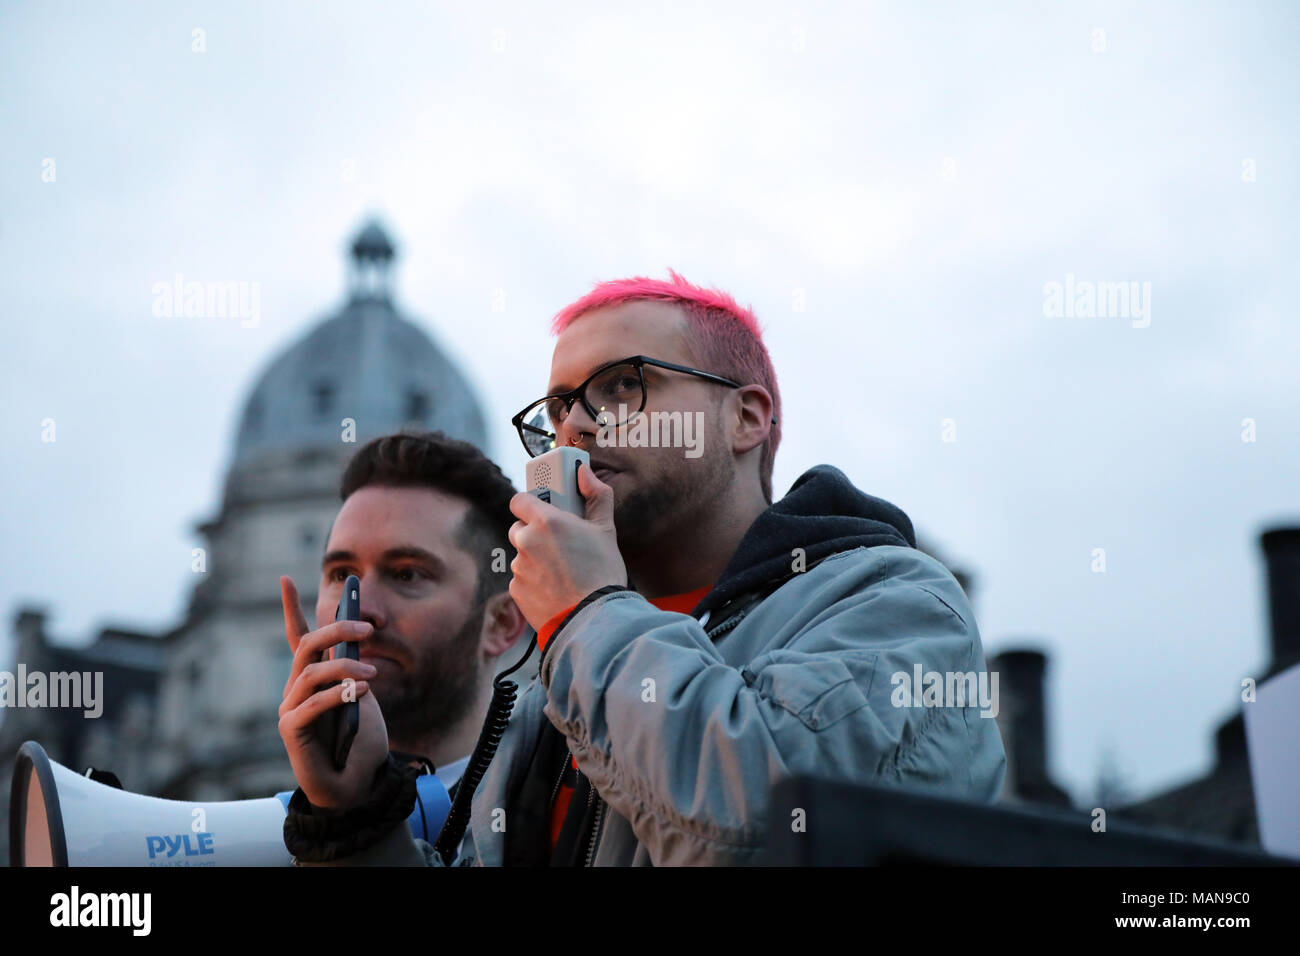 Christopher Wylie, a former director of research at Cambridge Analytica, addresses the Fair Vote rally in Parliament Square, London on 29 March, 2018. Stock Photo